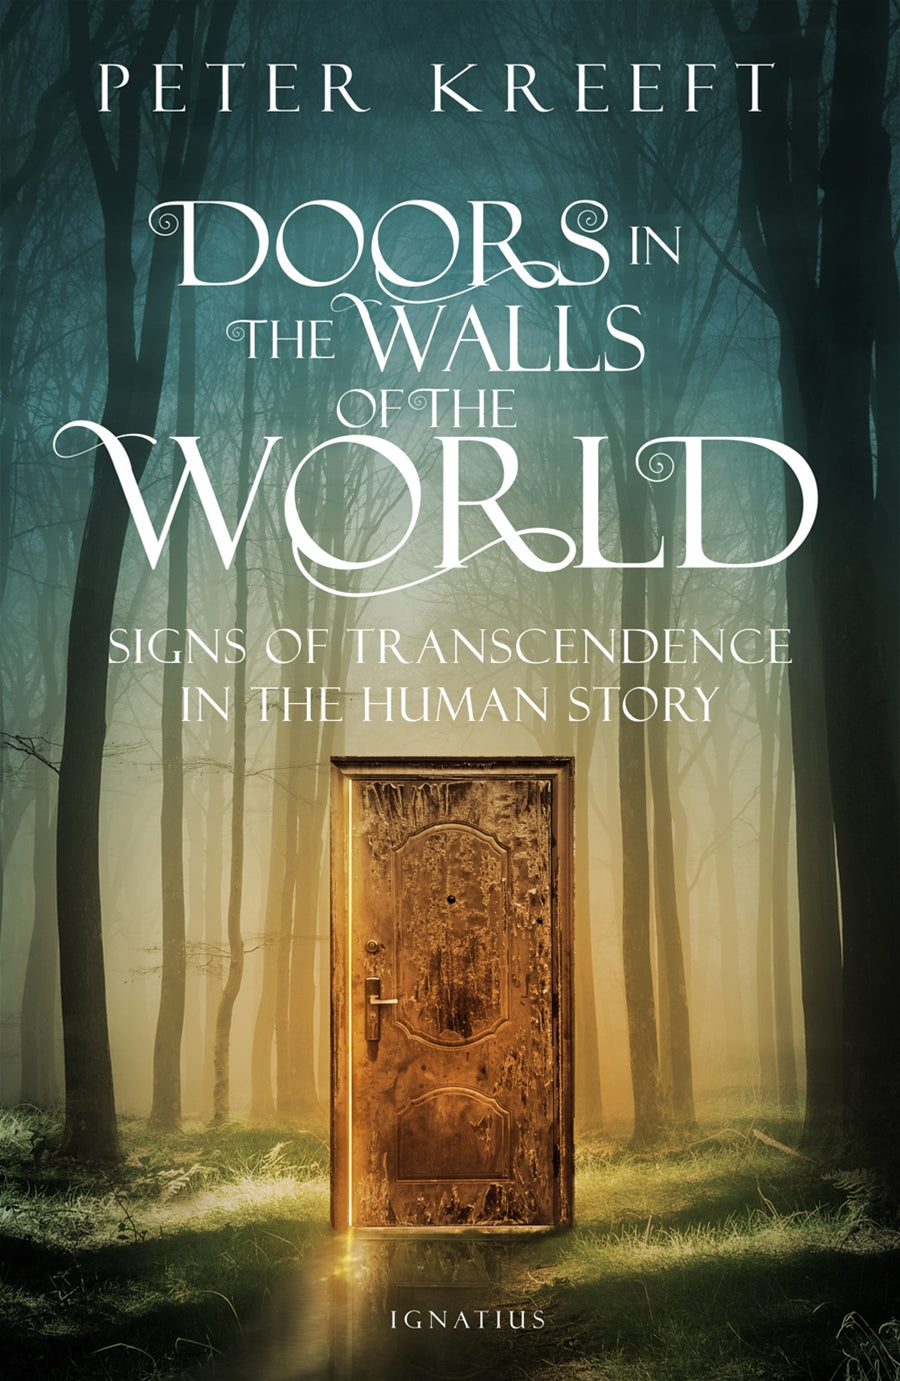 Doors in the Walls of the World - Signs of Transcendence in the Human Story